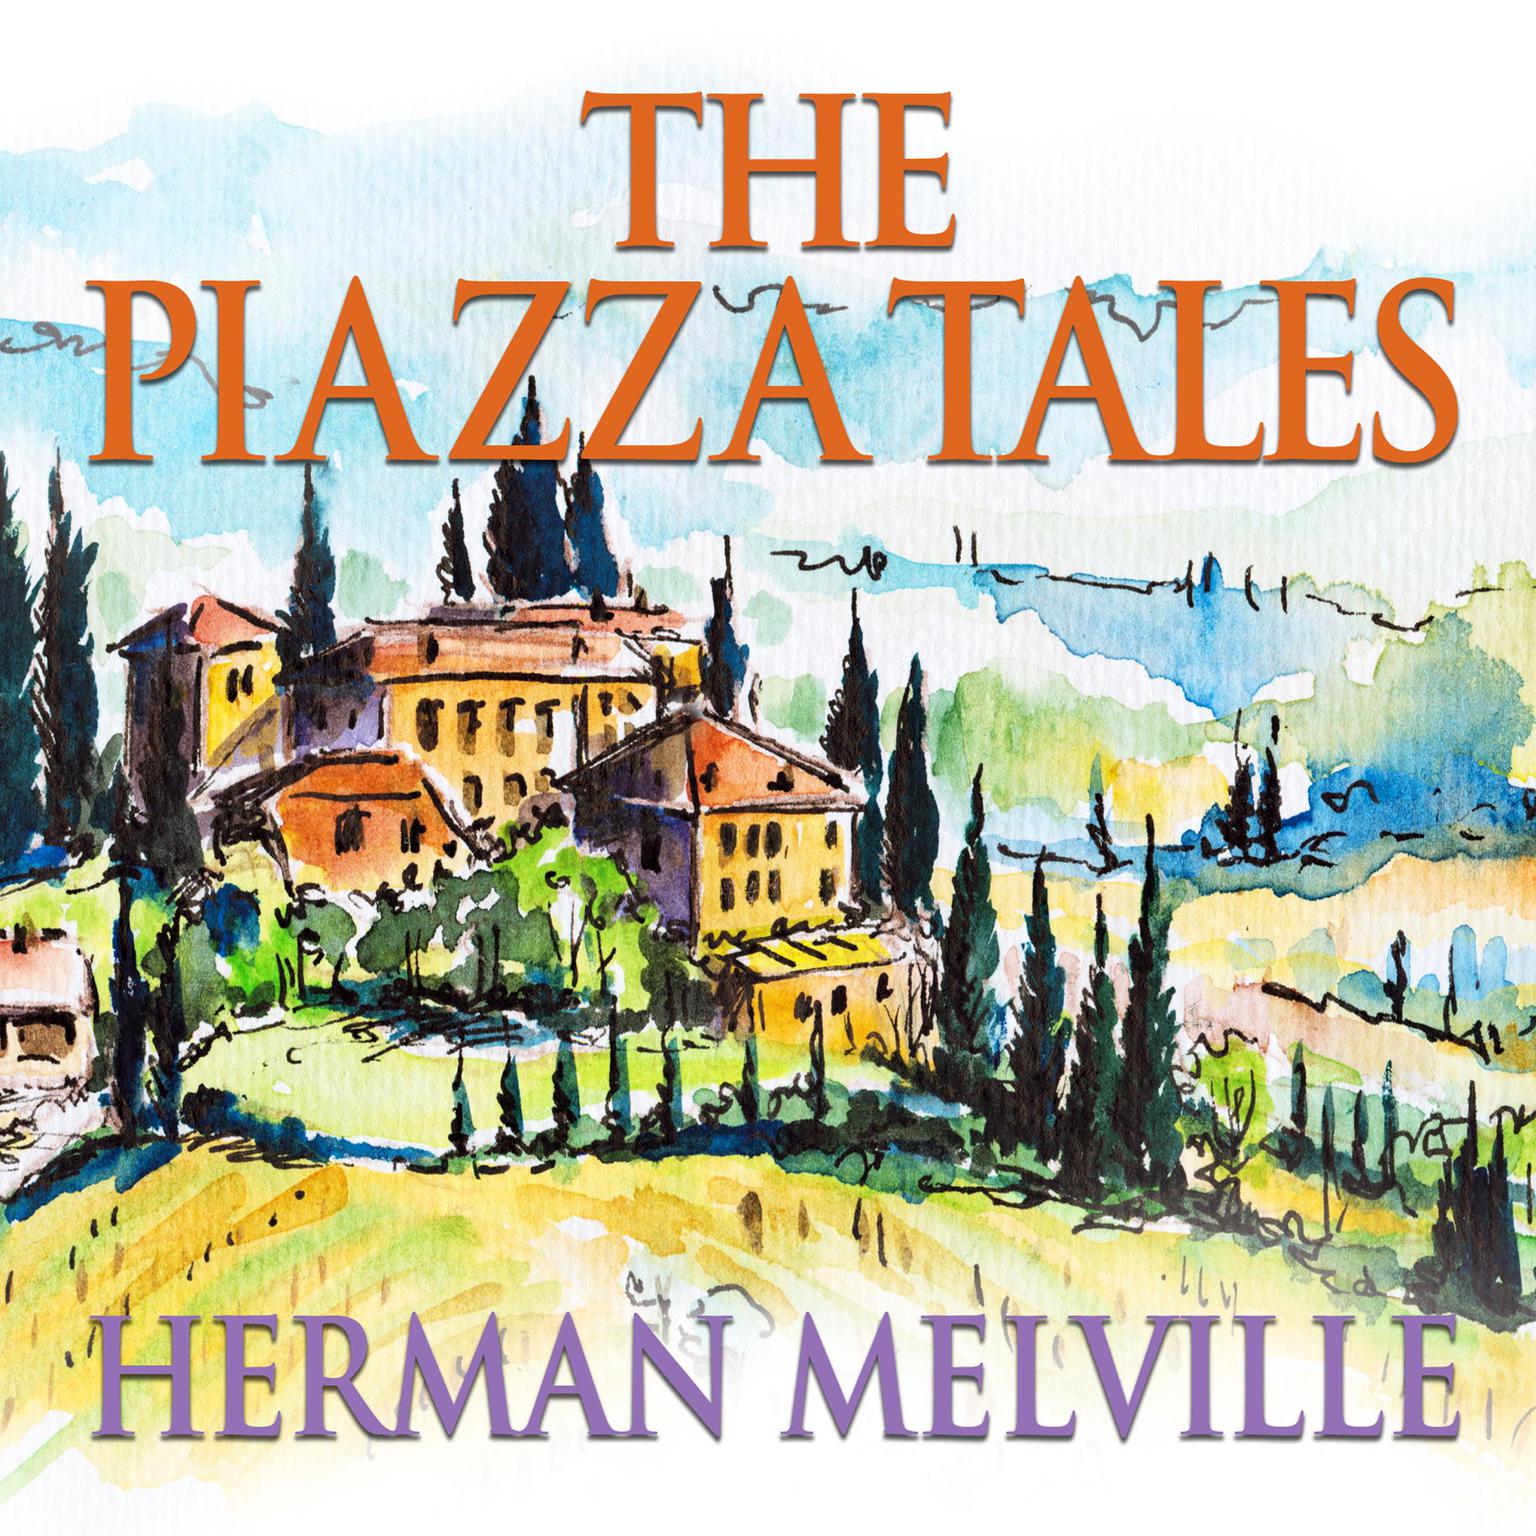 The Piazza Tales Audiobook, by Herman Melville